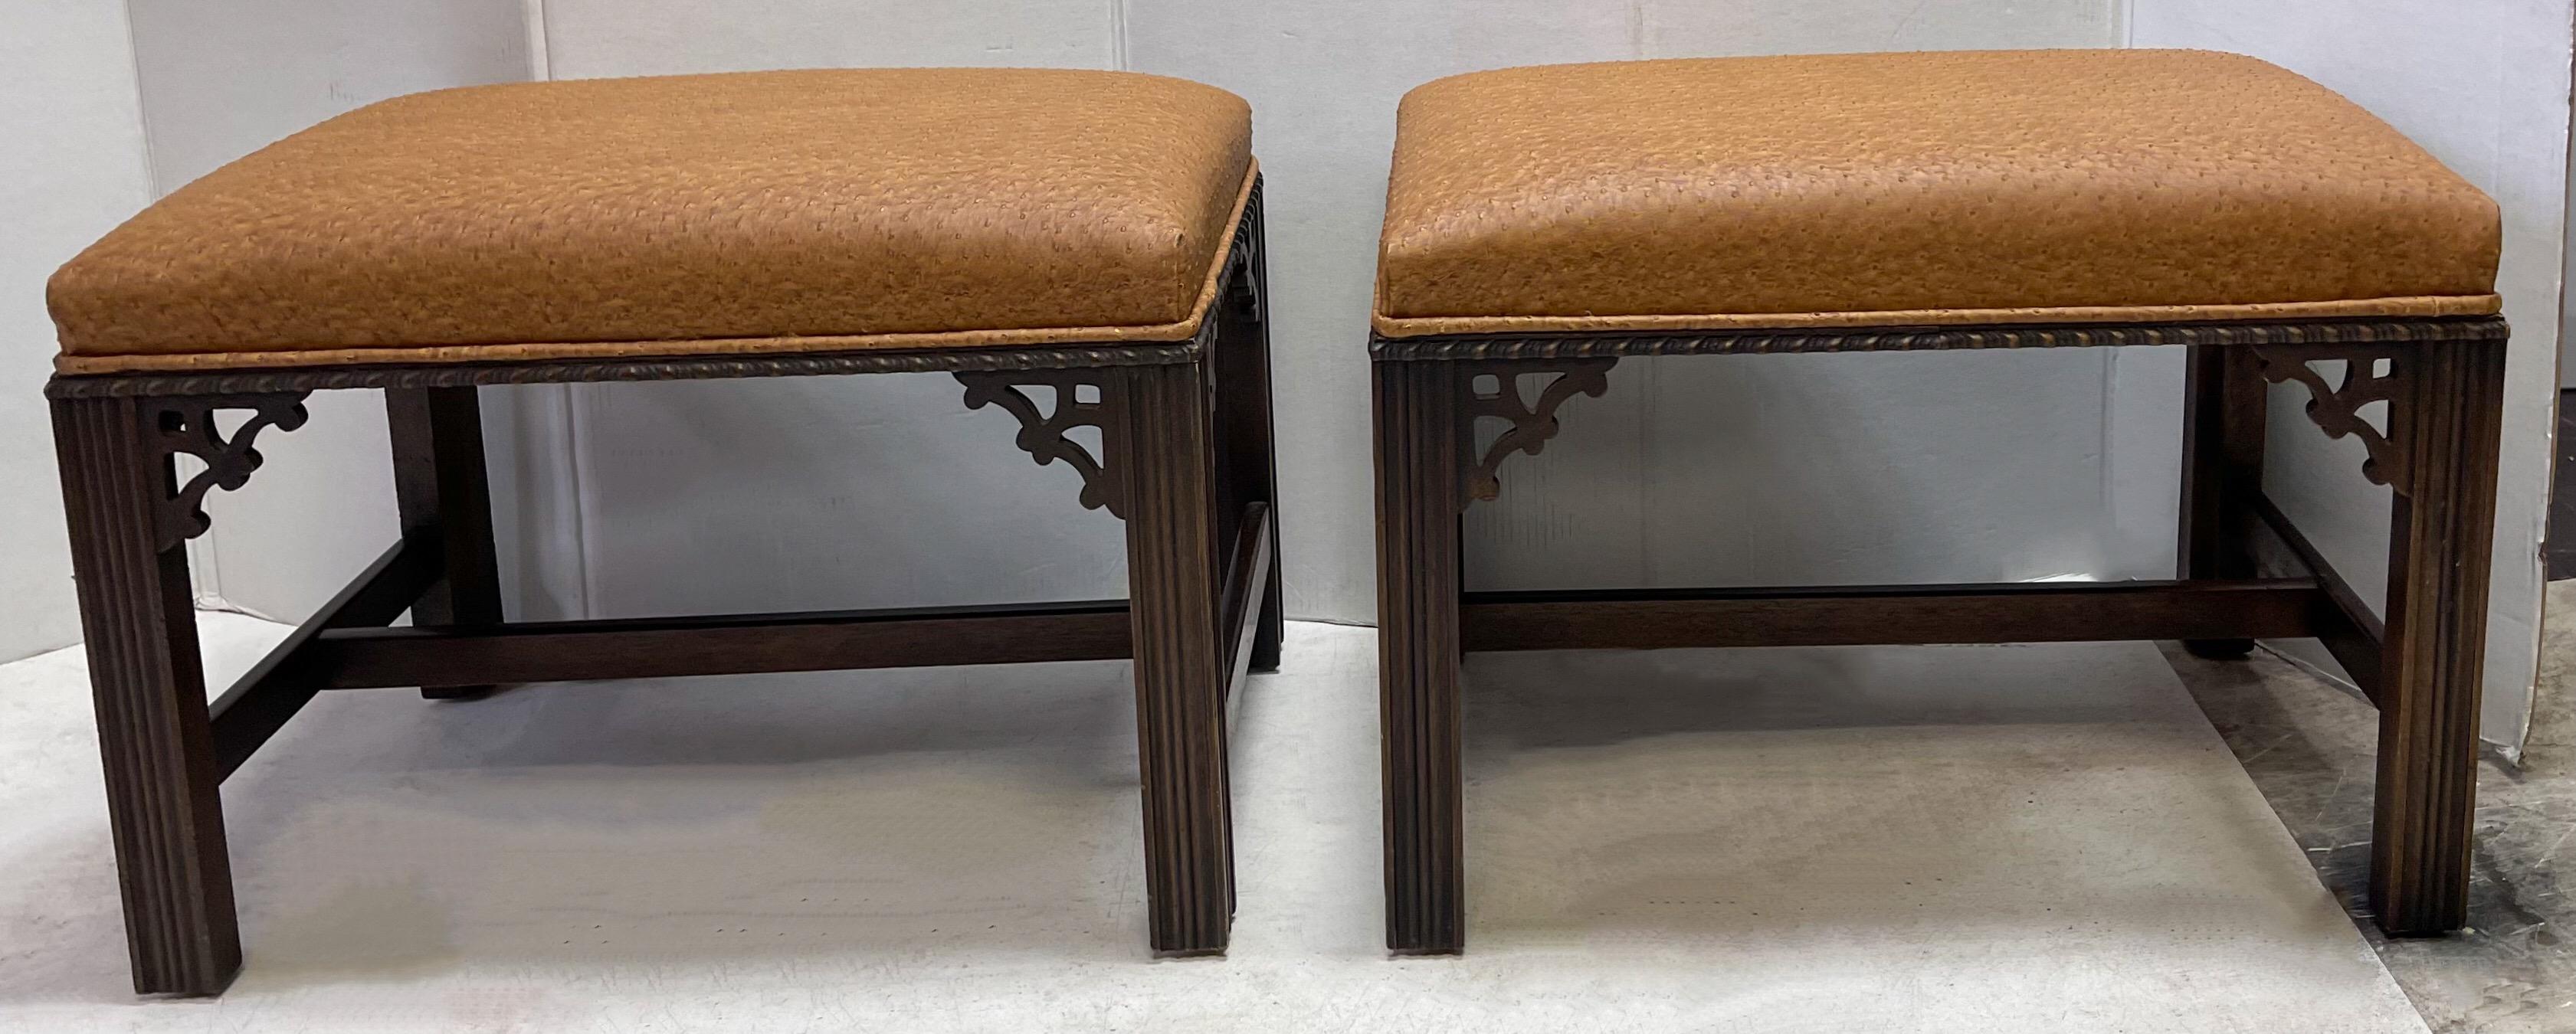 Late 20th Century 1970s Chinese Chippendale Style Ostrich Leather Ottomans Benches, Pair